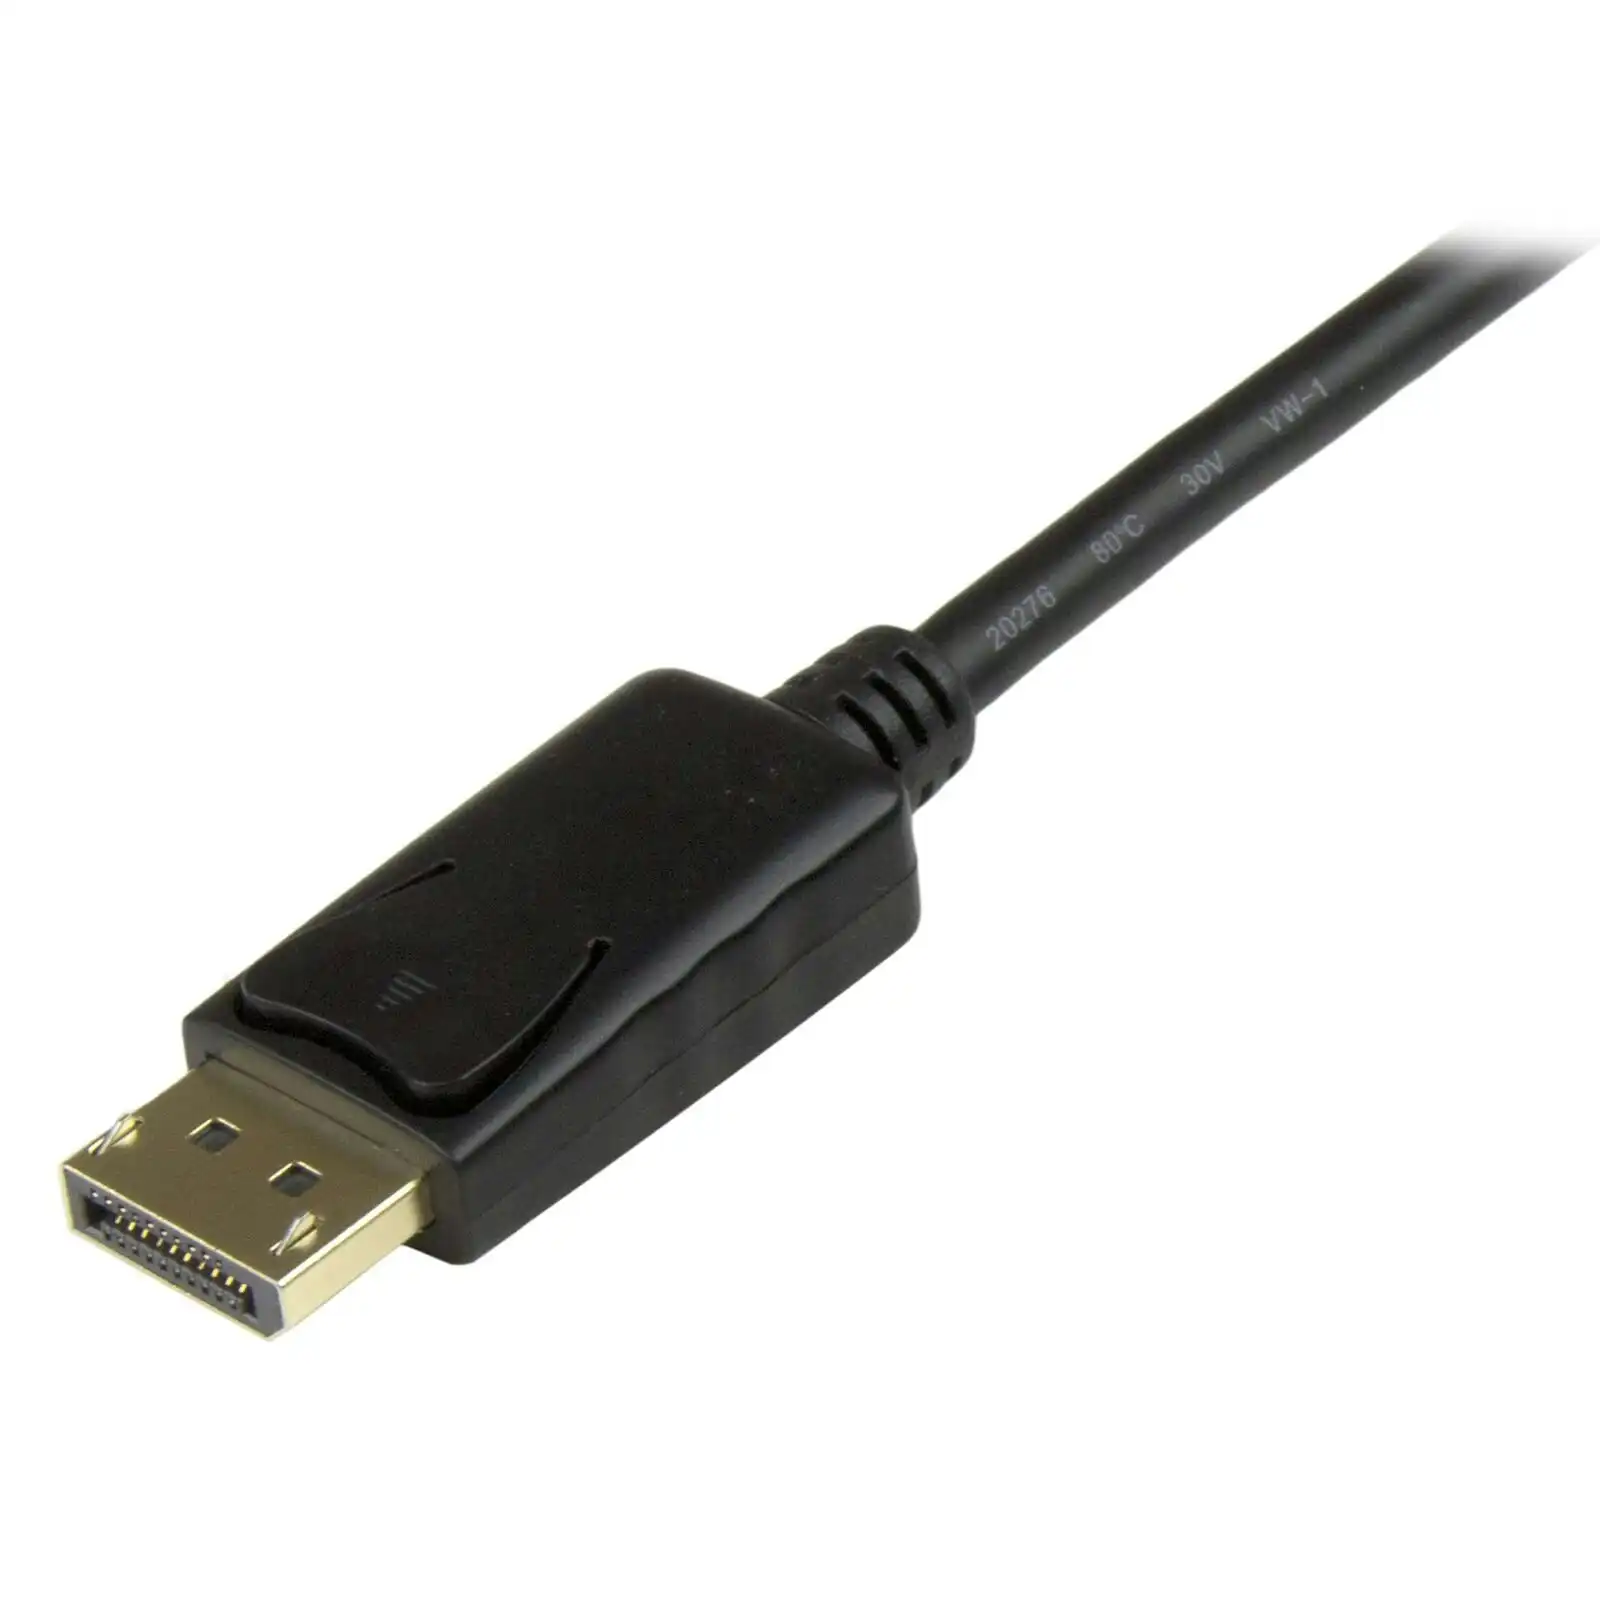 Star Tech DisplayPort To DVI Converter Cable 3ft 1080p Black For PC/Monitors